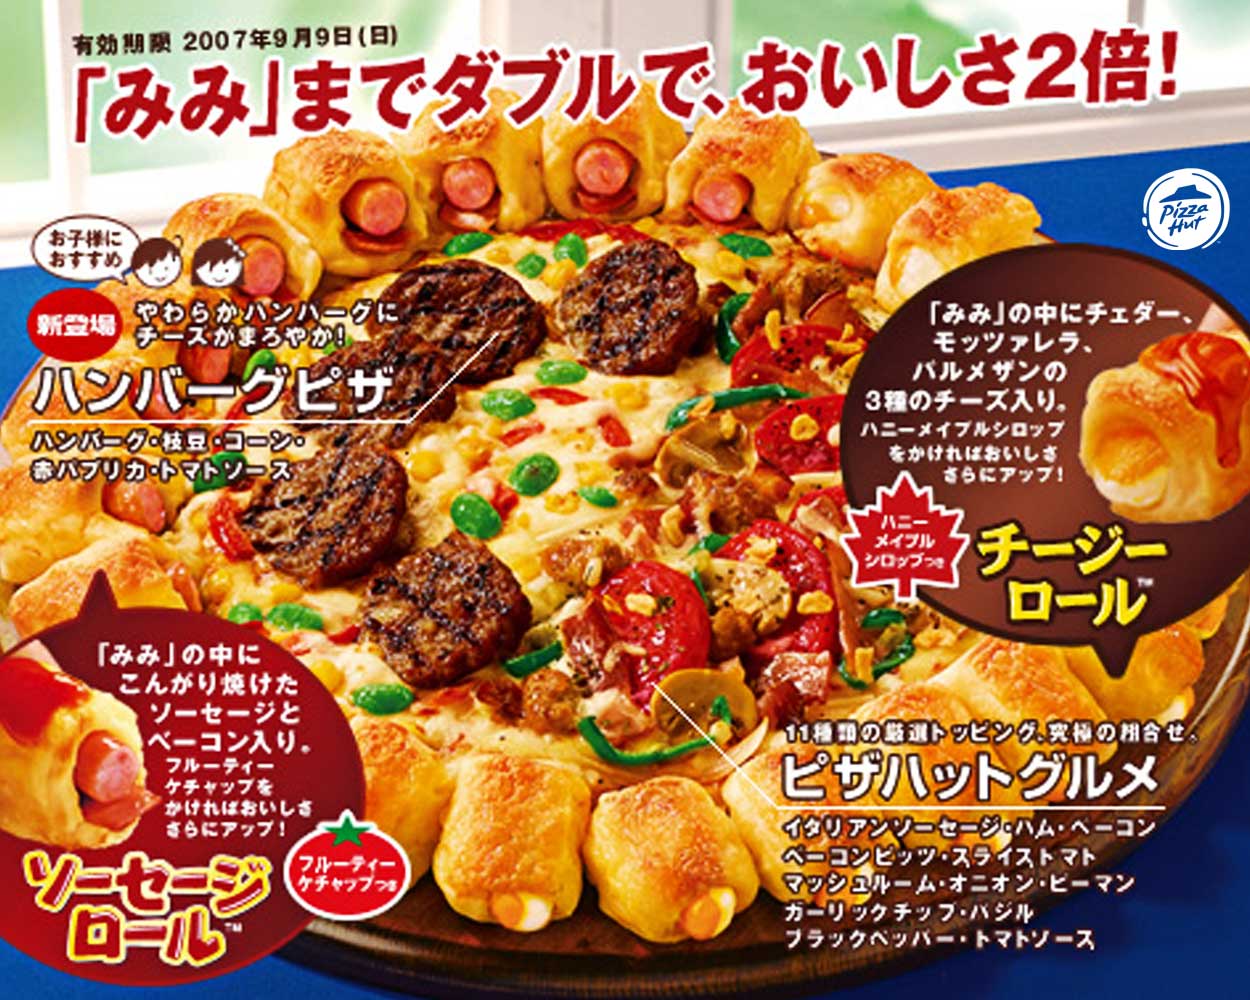 The Pizza Hut Double Roll Pizza Is 646 Calories Per Slice. Would You Eat It?